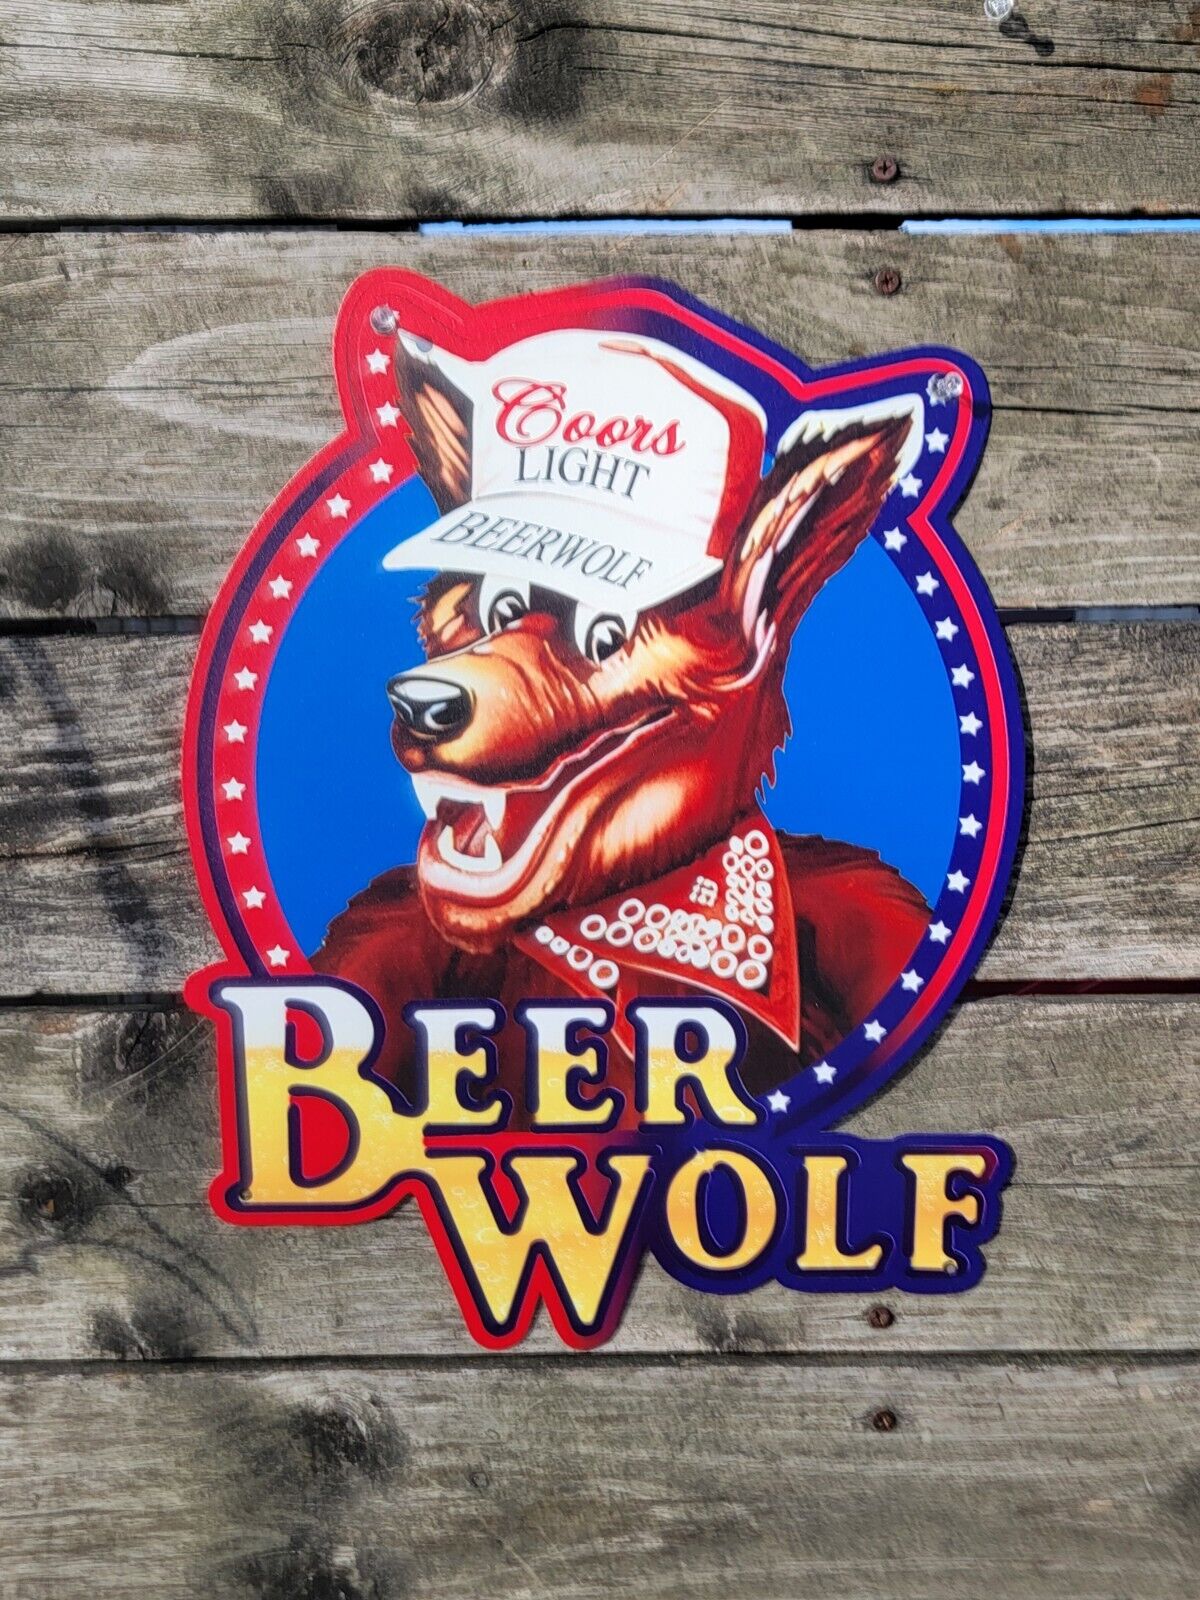 Coors Light Beer Wolf Metal Sign Mancave Wall Decor Rare Coor Beer Sign 